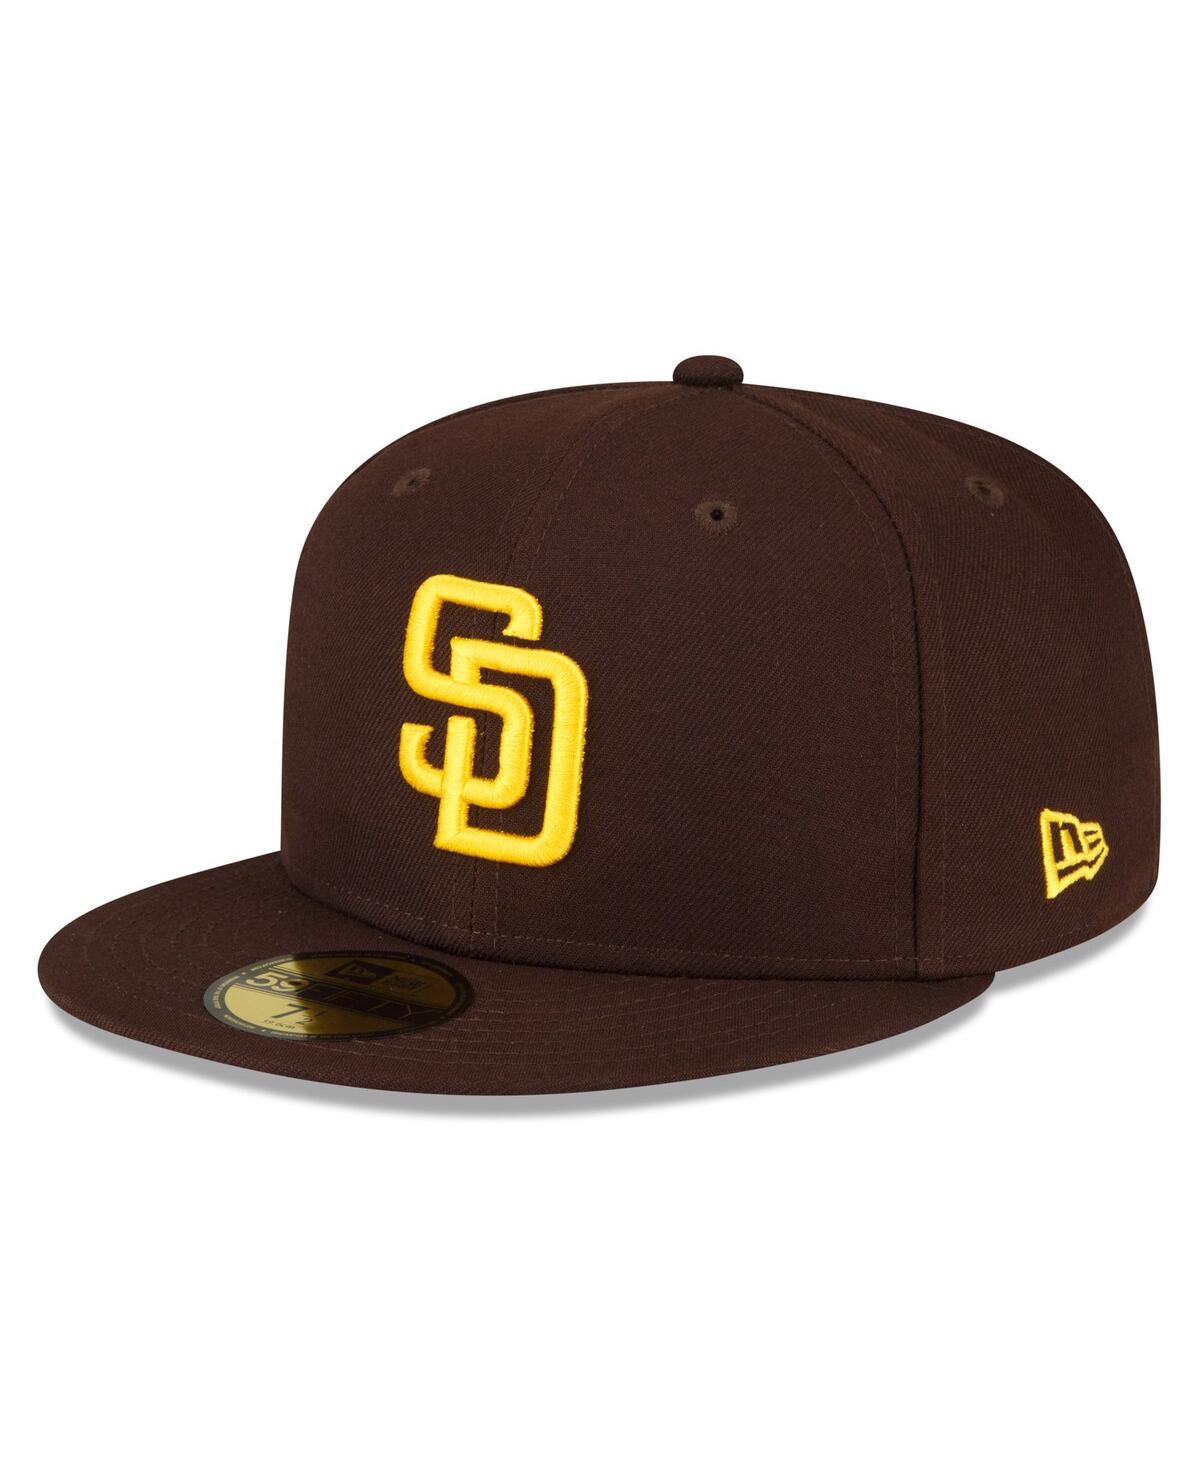 NEW ERA MEN'S NEW ERA BROWN SAN DIEGO PADRES AUTHENTIC COLLECTION REPLICA 59FIFTY FITTED HAT